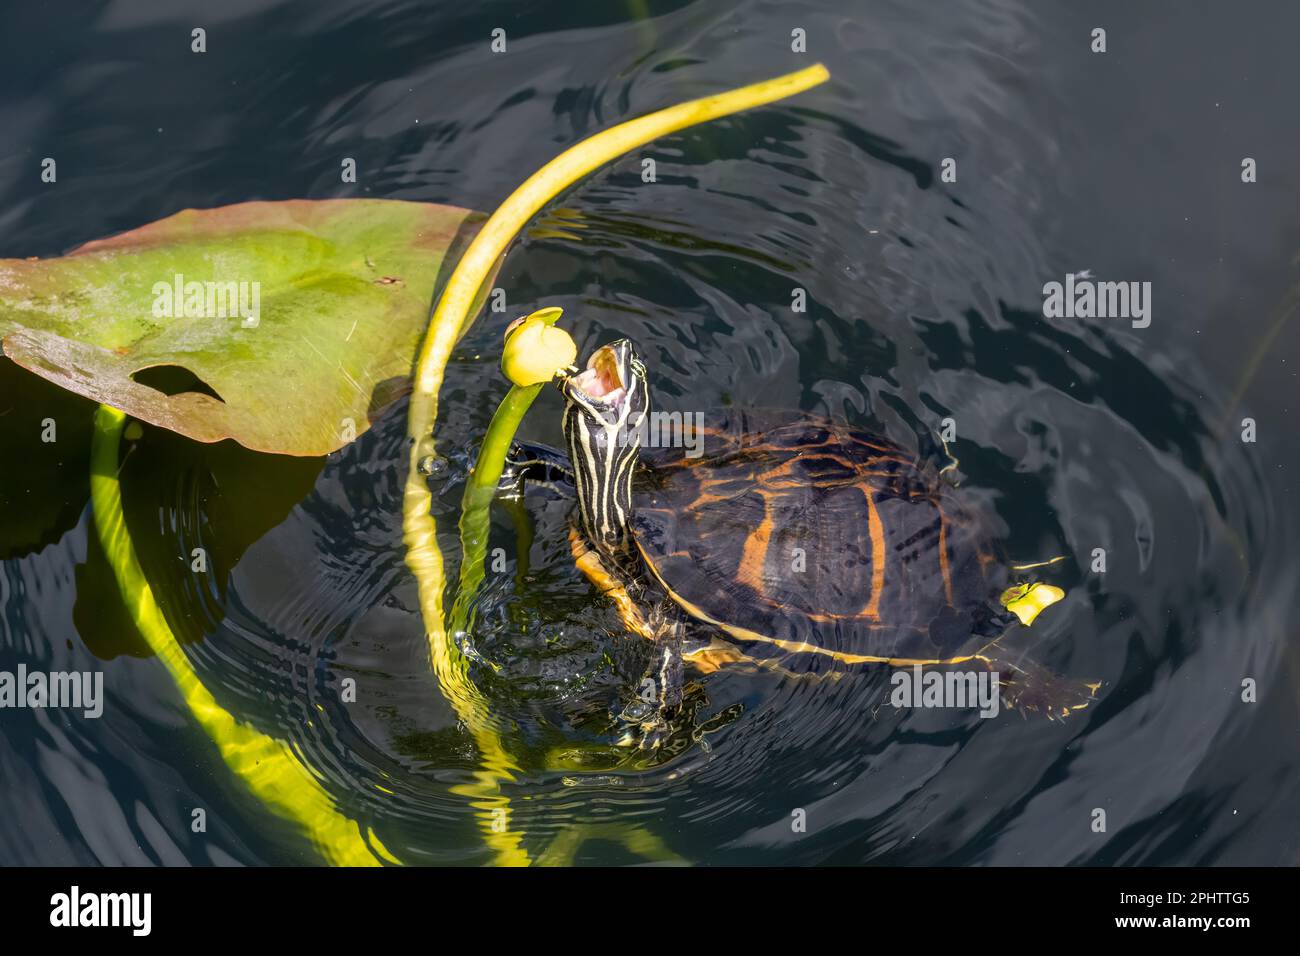 Florida Redbelly Turtle - Pseudemys nelsoni - eating water lily on Anhinga Trail in Everglades National Park, Florida. Stock Photo